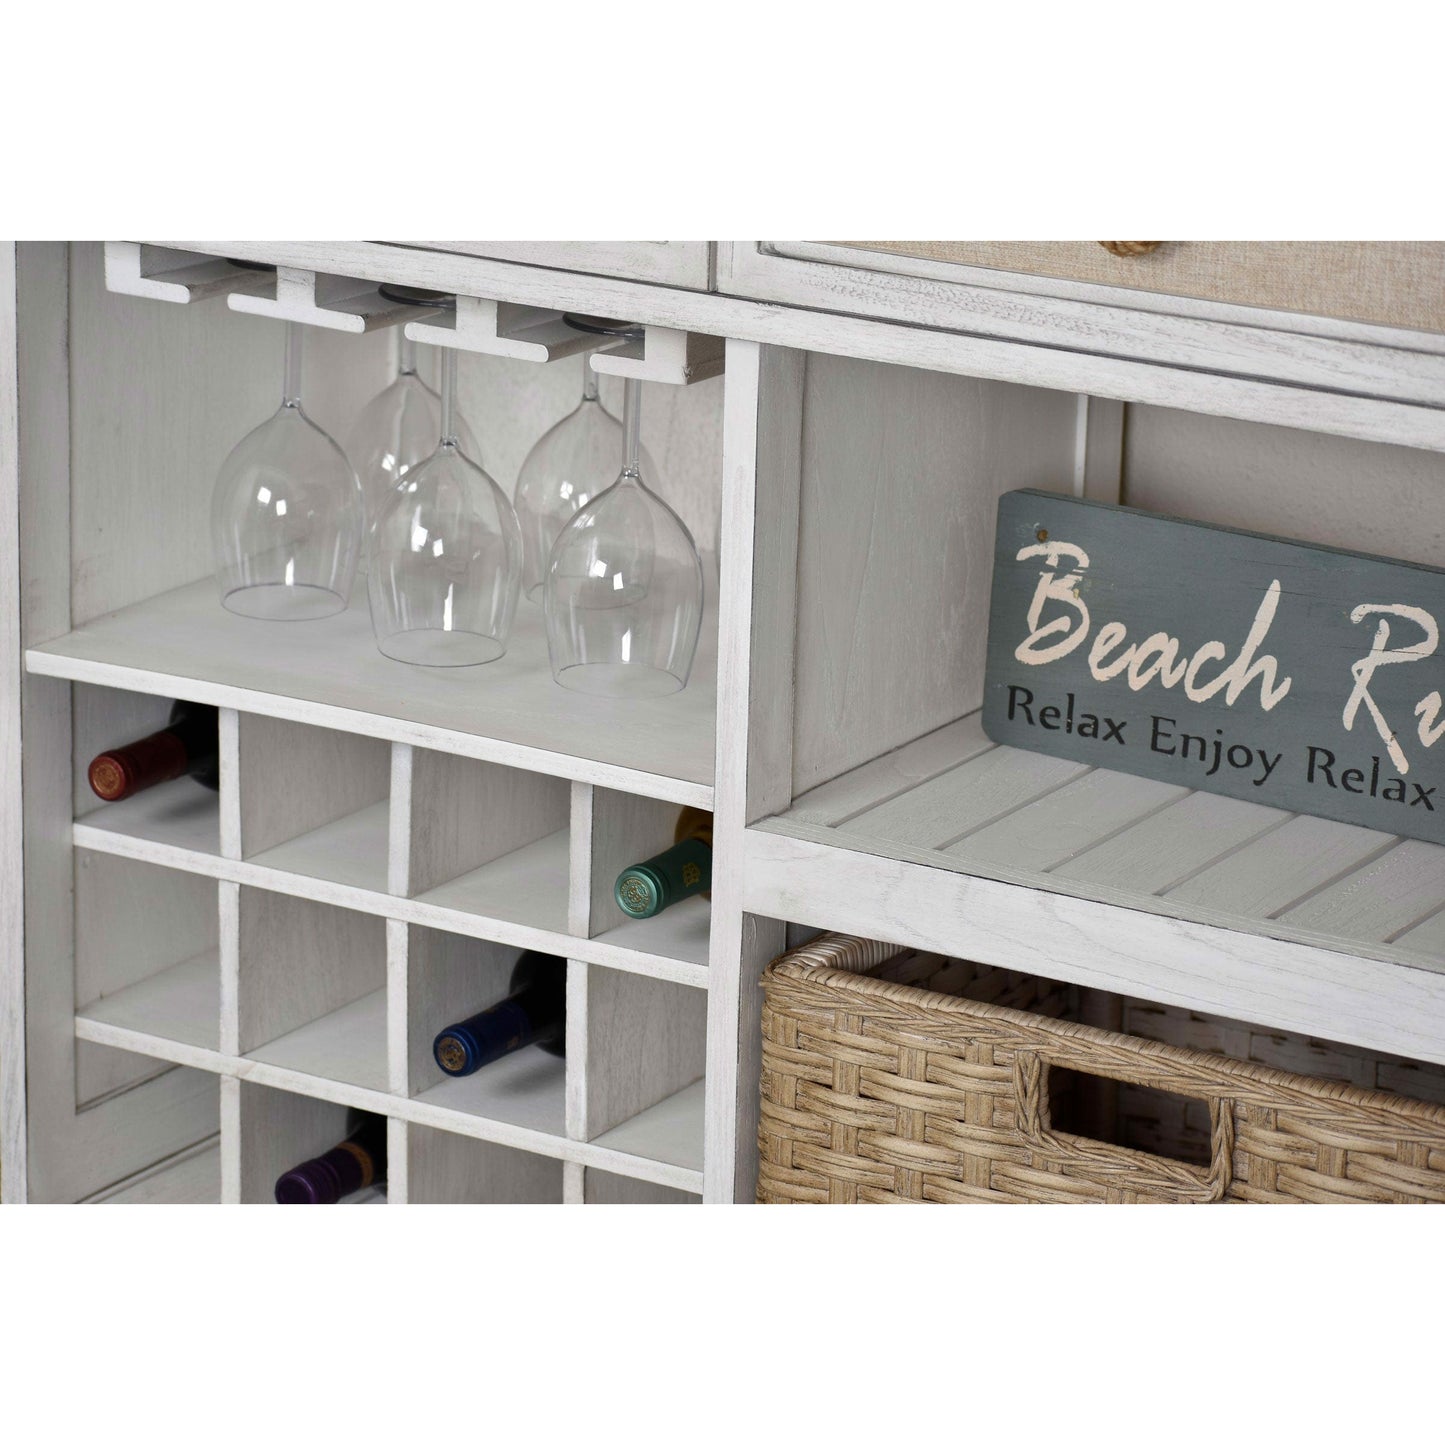 Sea Winds Trading Captiva Island Sideboard with Wine Rack with 2 Baskets B86327 Indoor Sea Winds Trading Co 